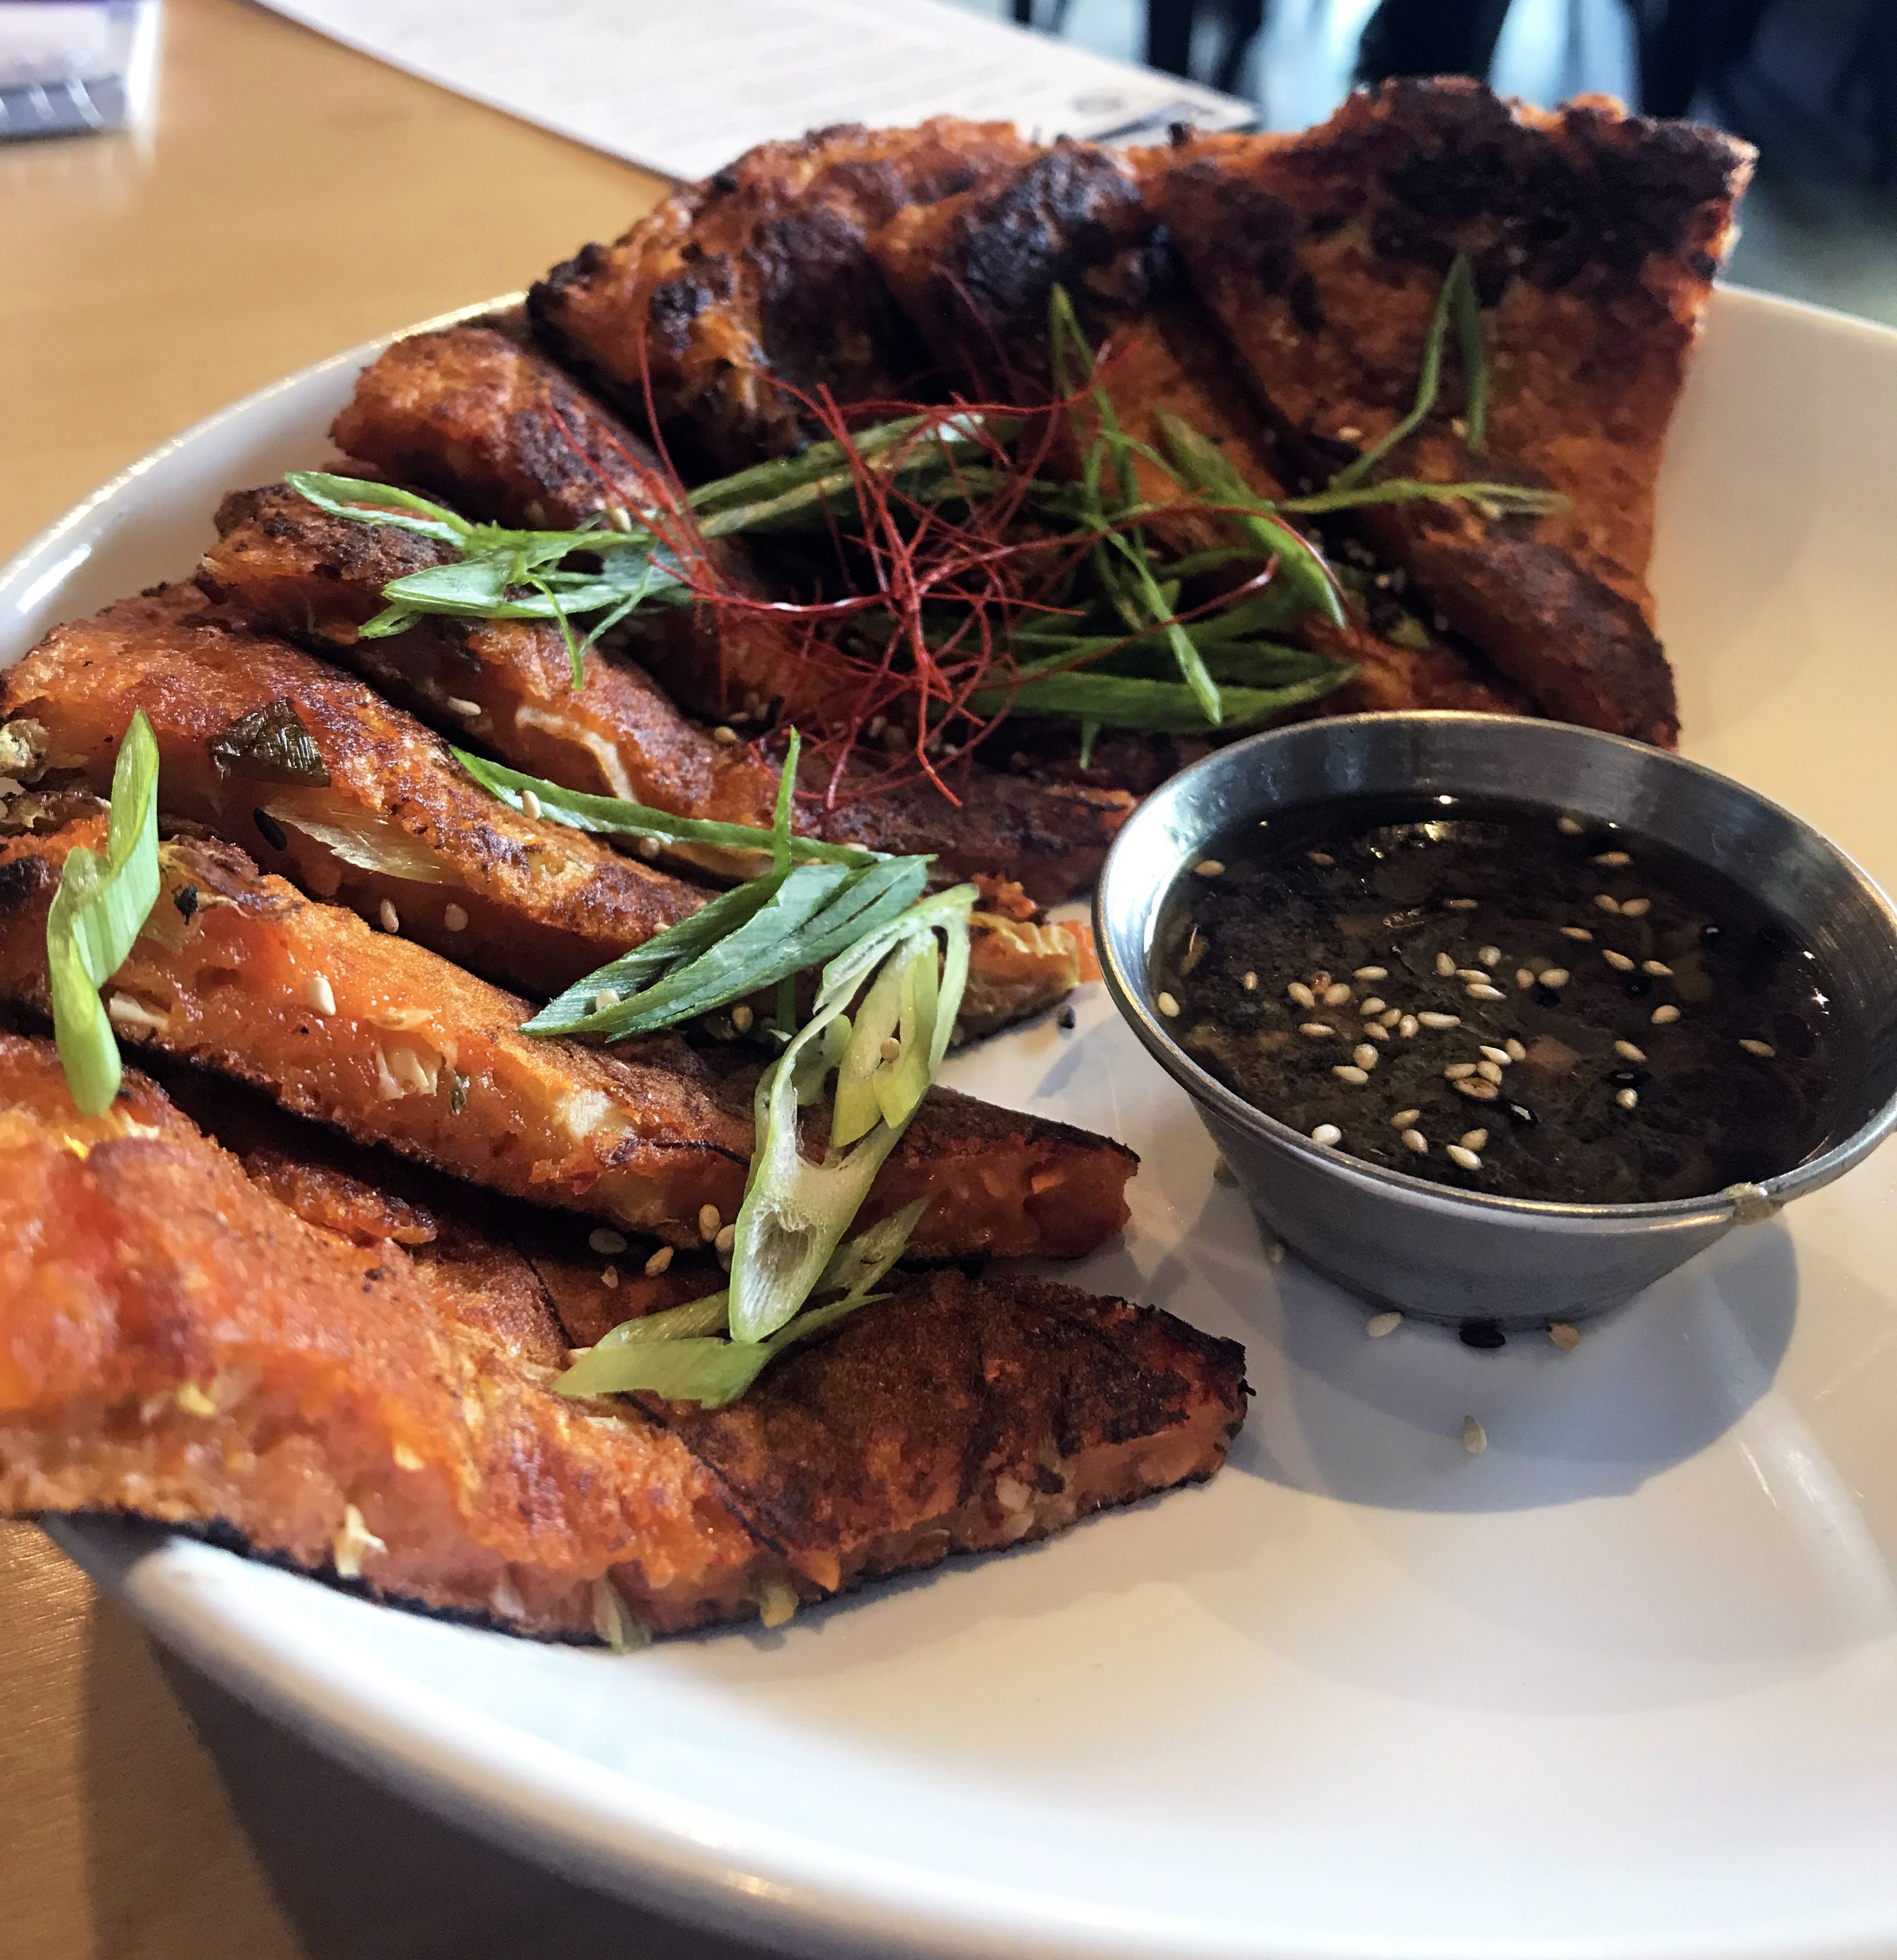 We had the pleasure of tasting a variety of dishes, complimentary of HOMES, including the chicken wings; both the Sichuan dry rub and Korean BBQ; a Kimchi Flight, which is a trio of seasonal house kimchi; a daily special of Kimchi Pancakes.